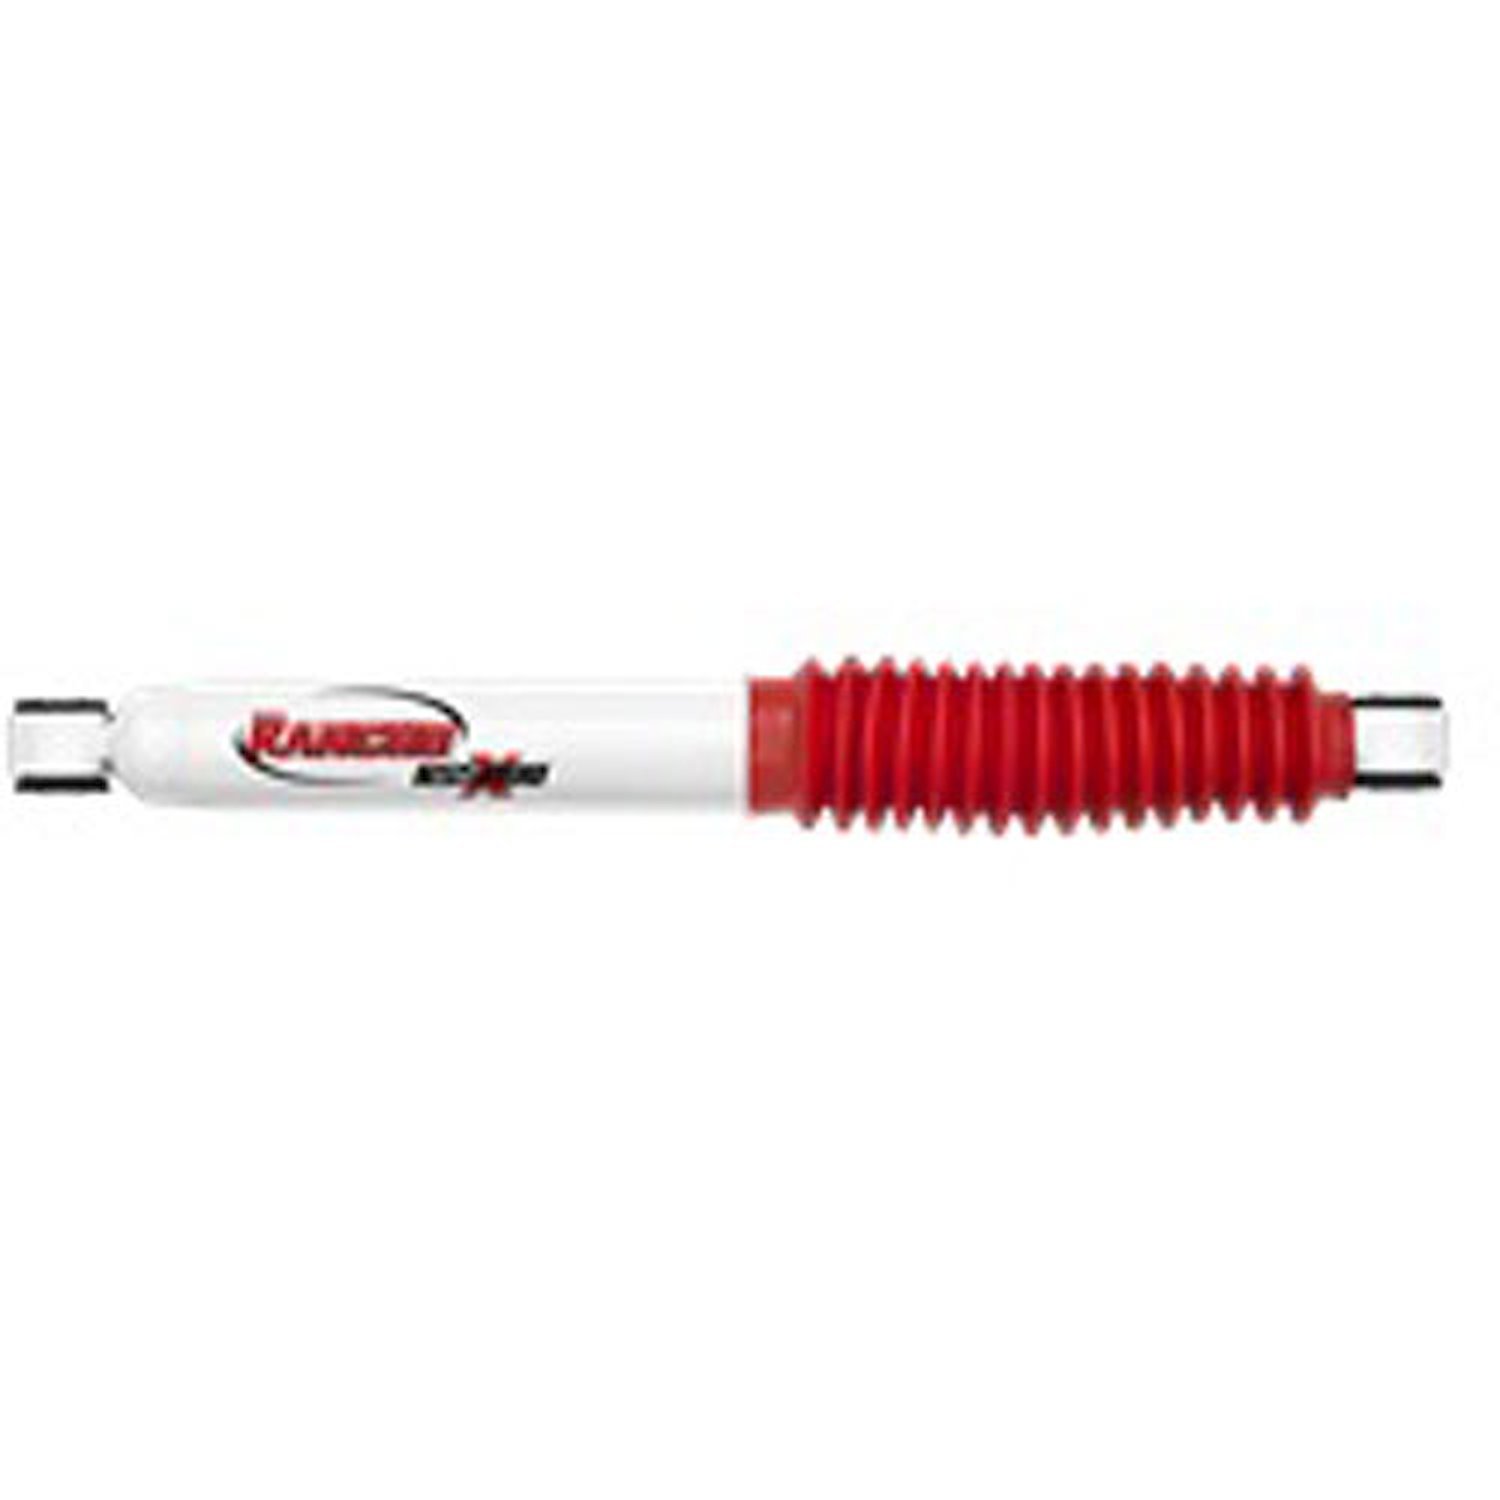 RS5000X Rear Shock Absorber Fits Chevy Avalanche, GM 1500 Pickups and SUVs